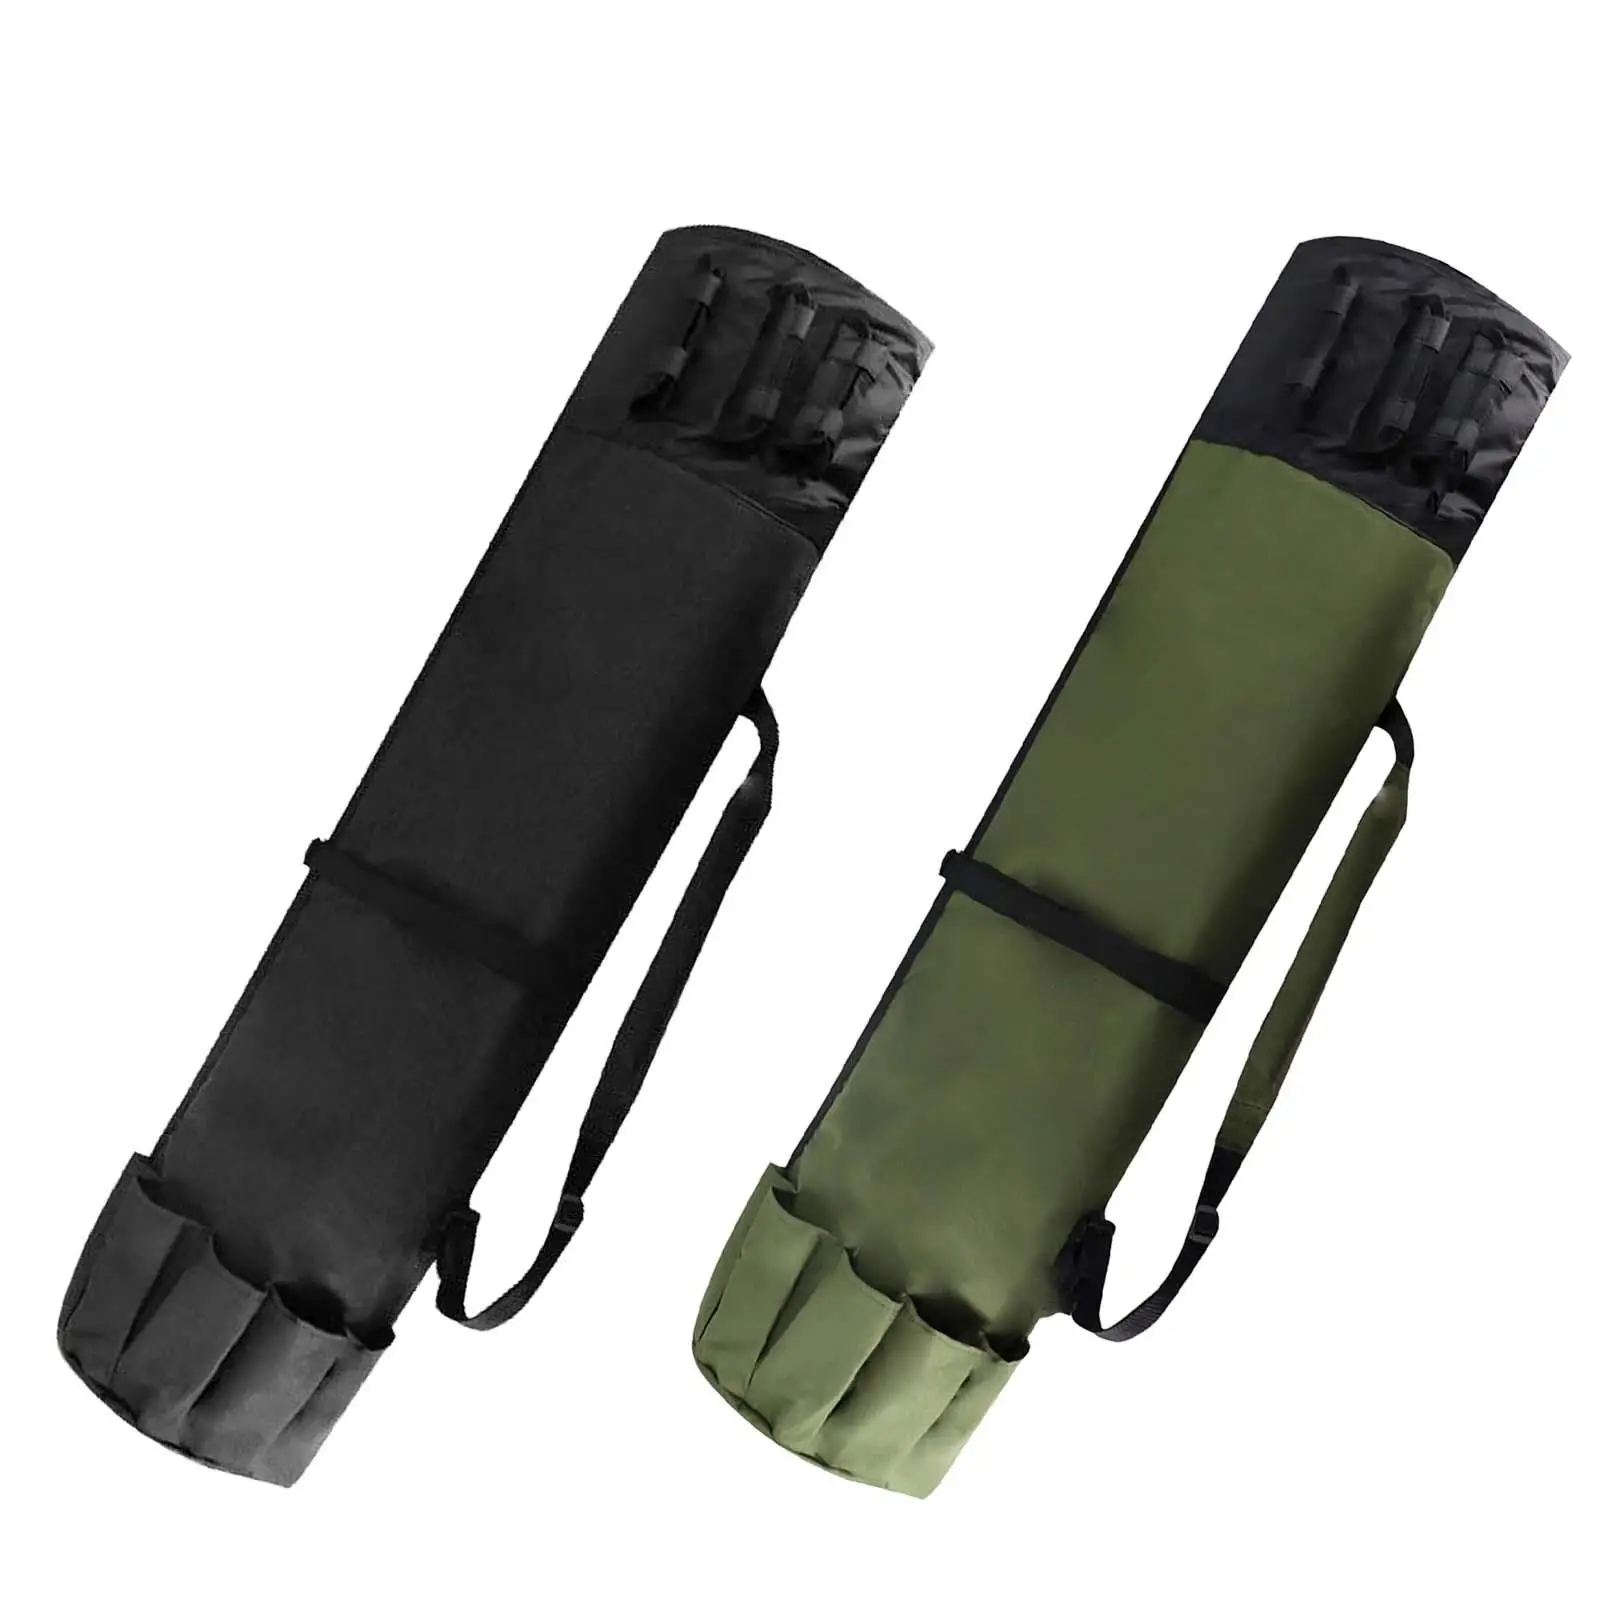 Fishing Pole Case Fishing Gear Shoulder Bags Portable Outdoor Rod Holder